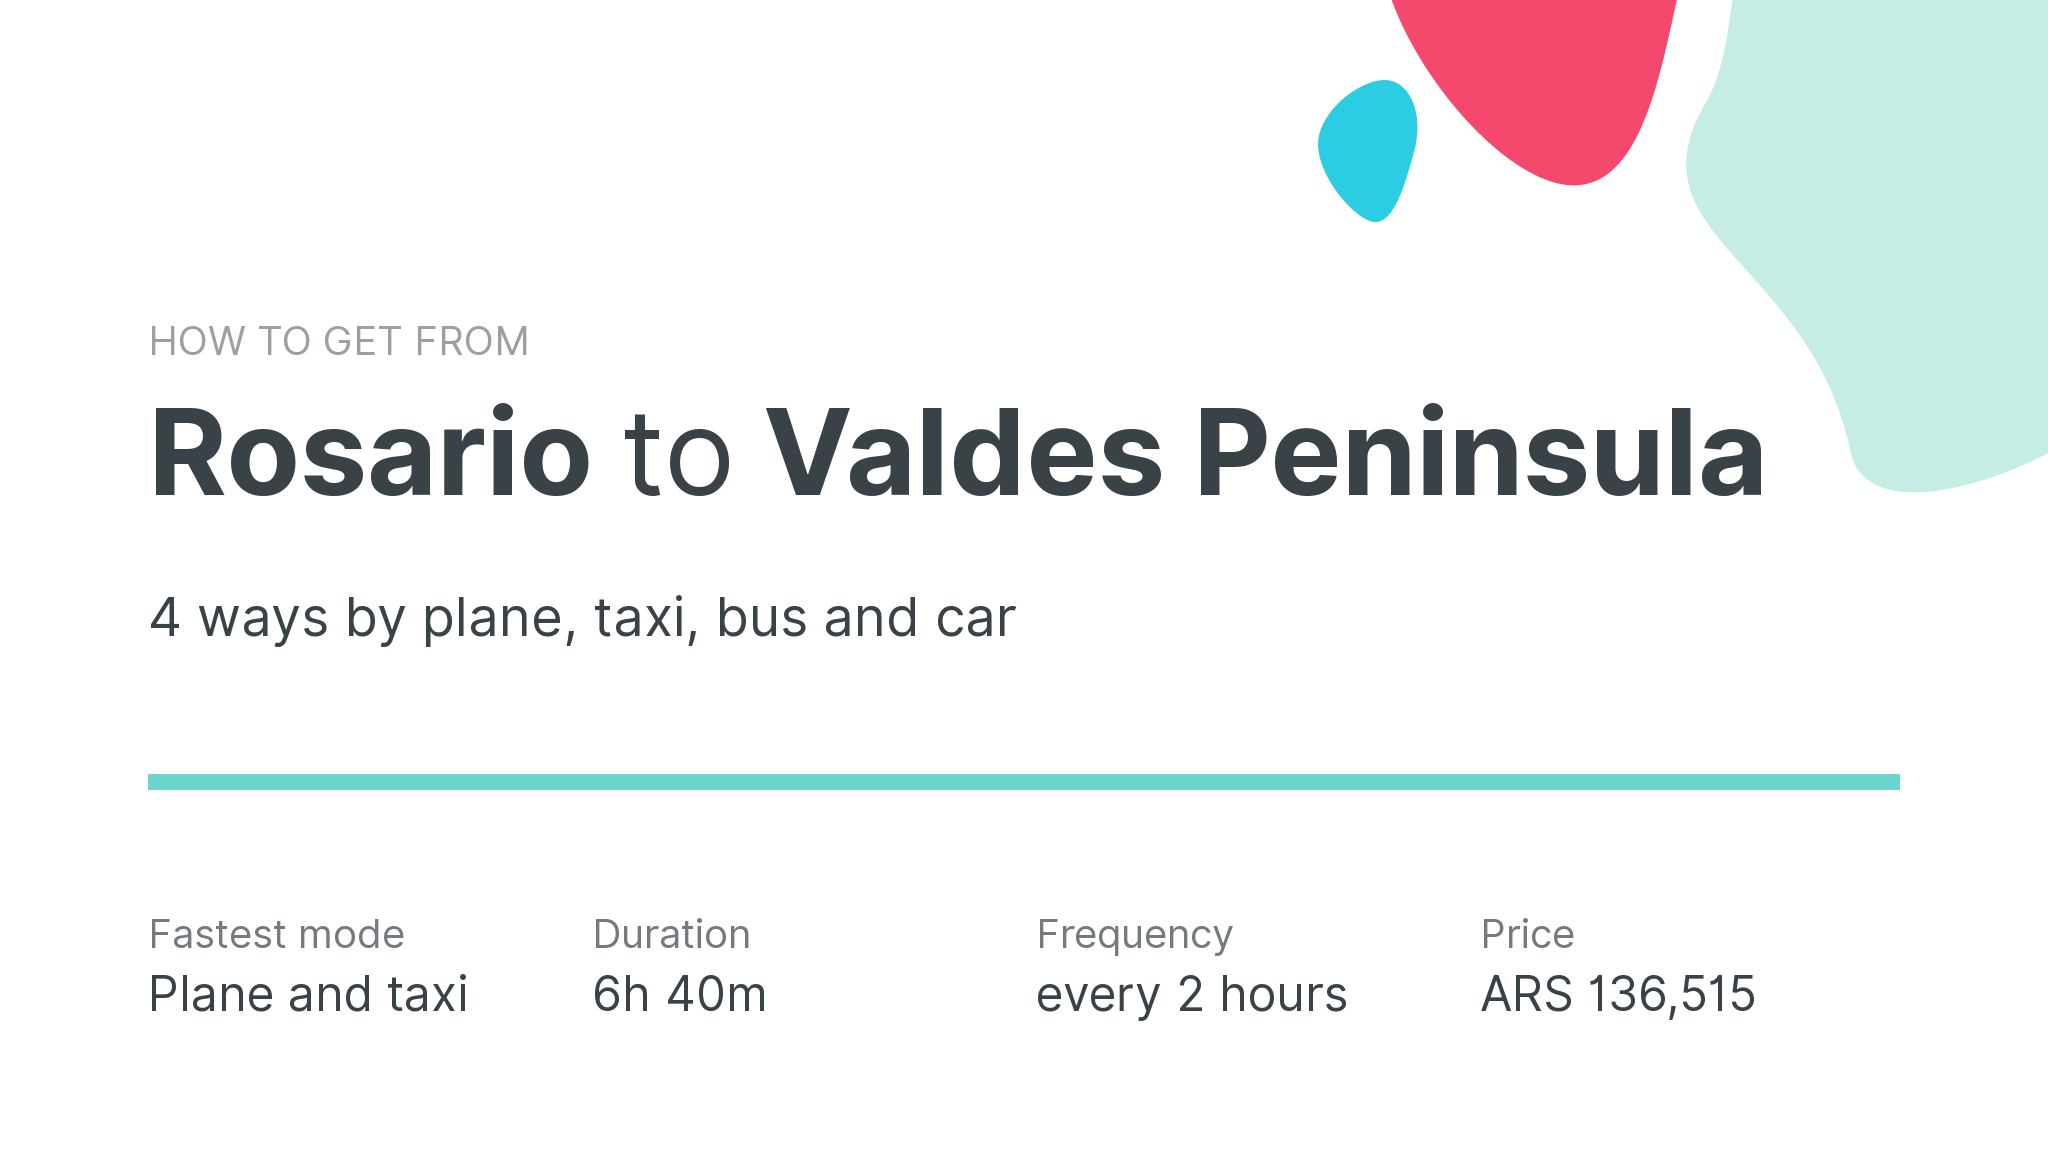 How do I get from Rosario to Valdes Peninsula